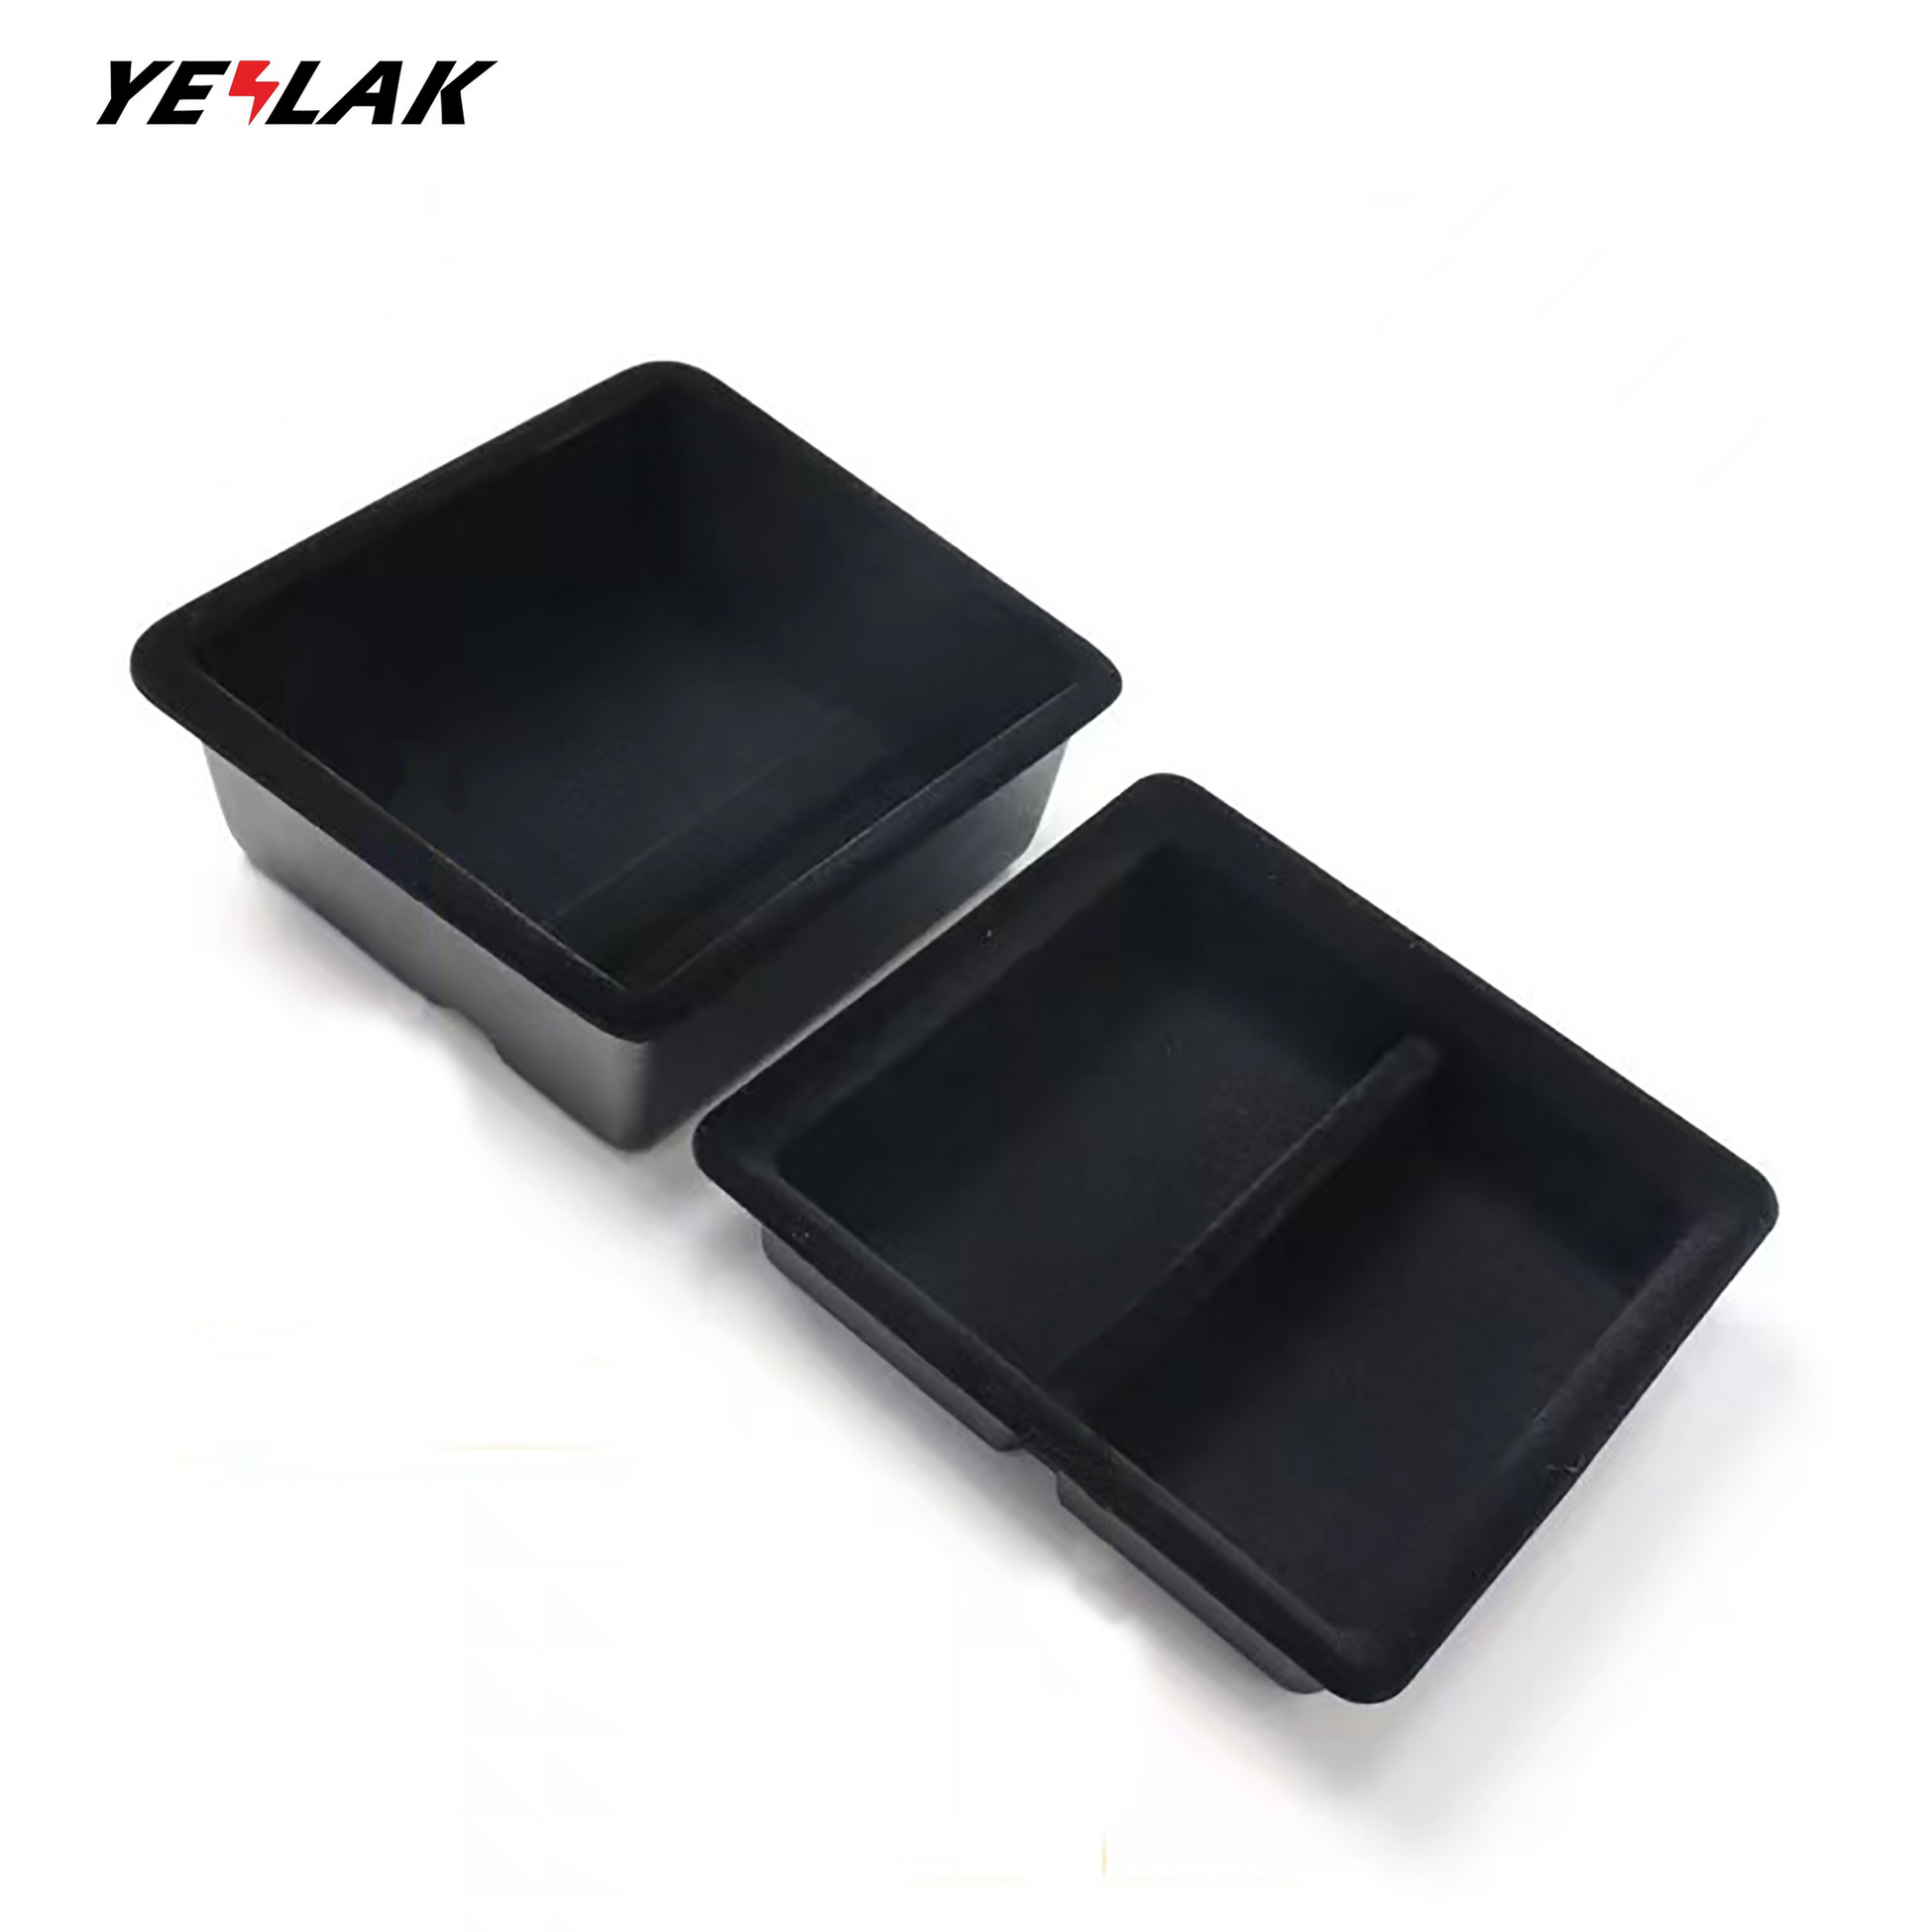 Best Center Console Organizers Insert for Tesla vehicles in 2022 – Yeslak